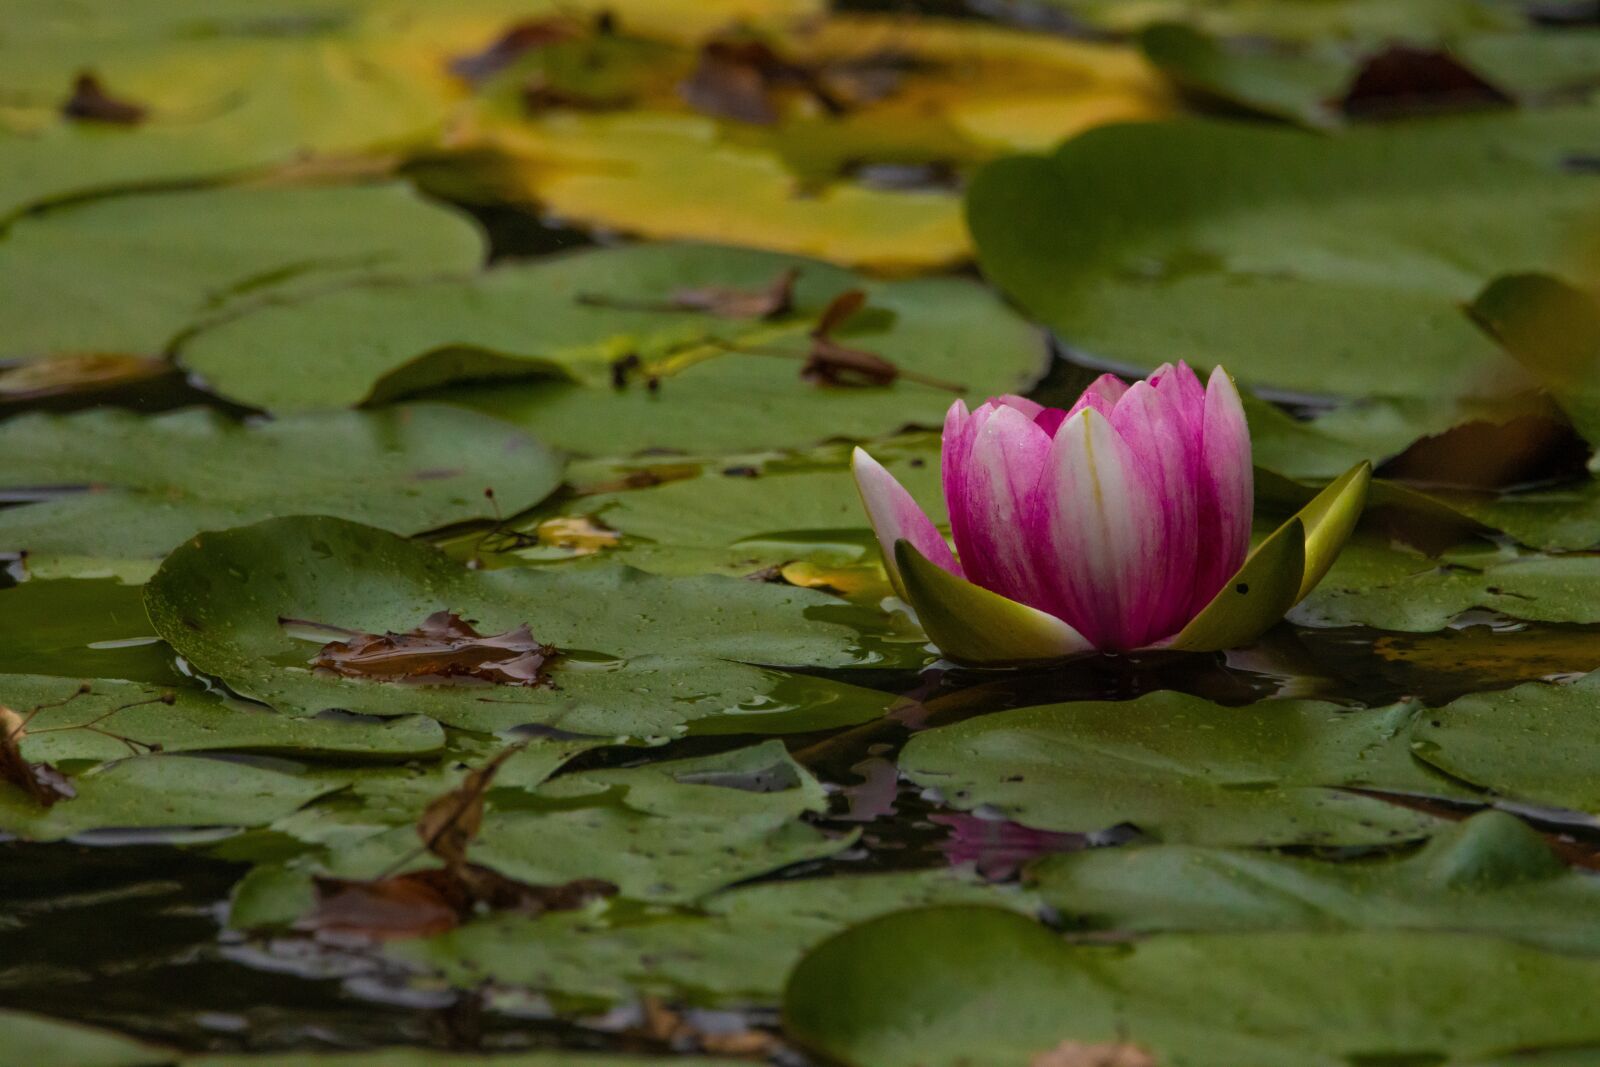 150-600mm F5-6.3 DG OS HSM | Contemporary 015 sample photo. Water lily, bank, water photography